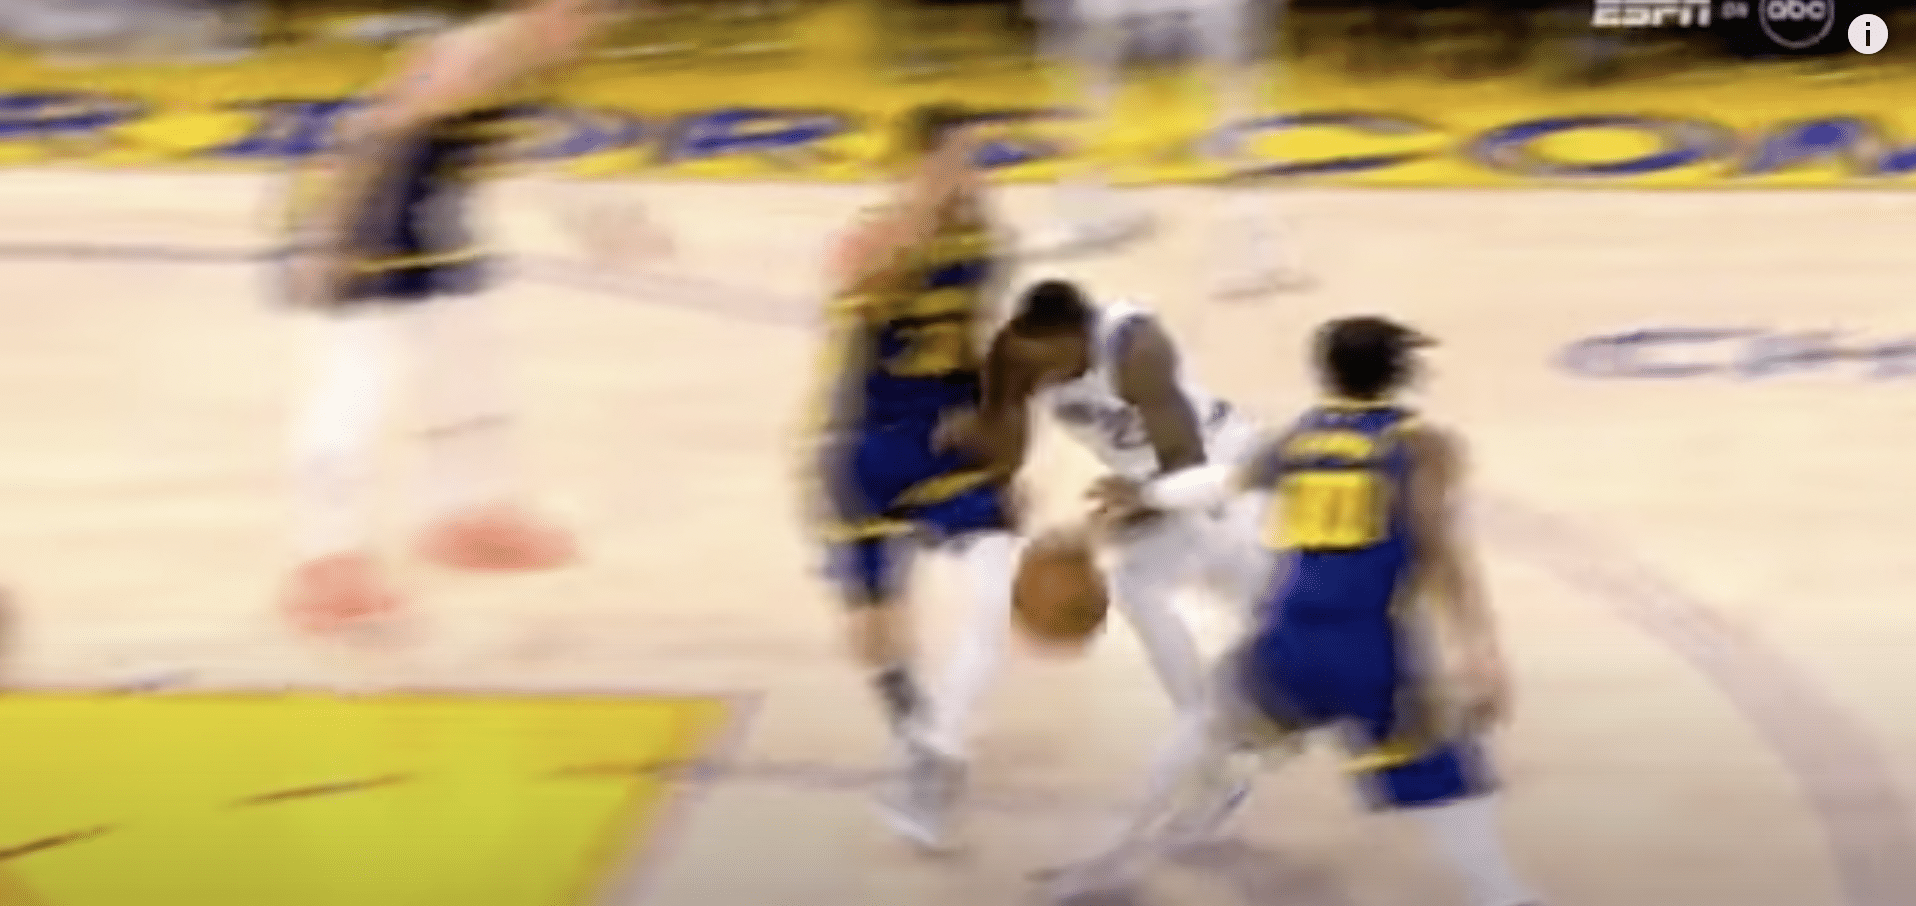 Stephen Curry INJURED On This Play - NOT GOOD